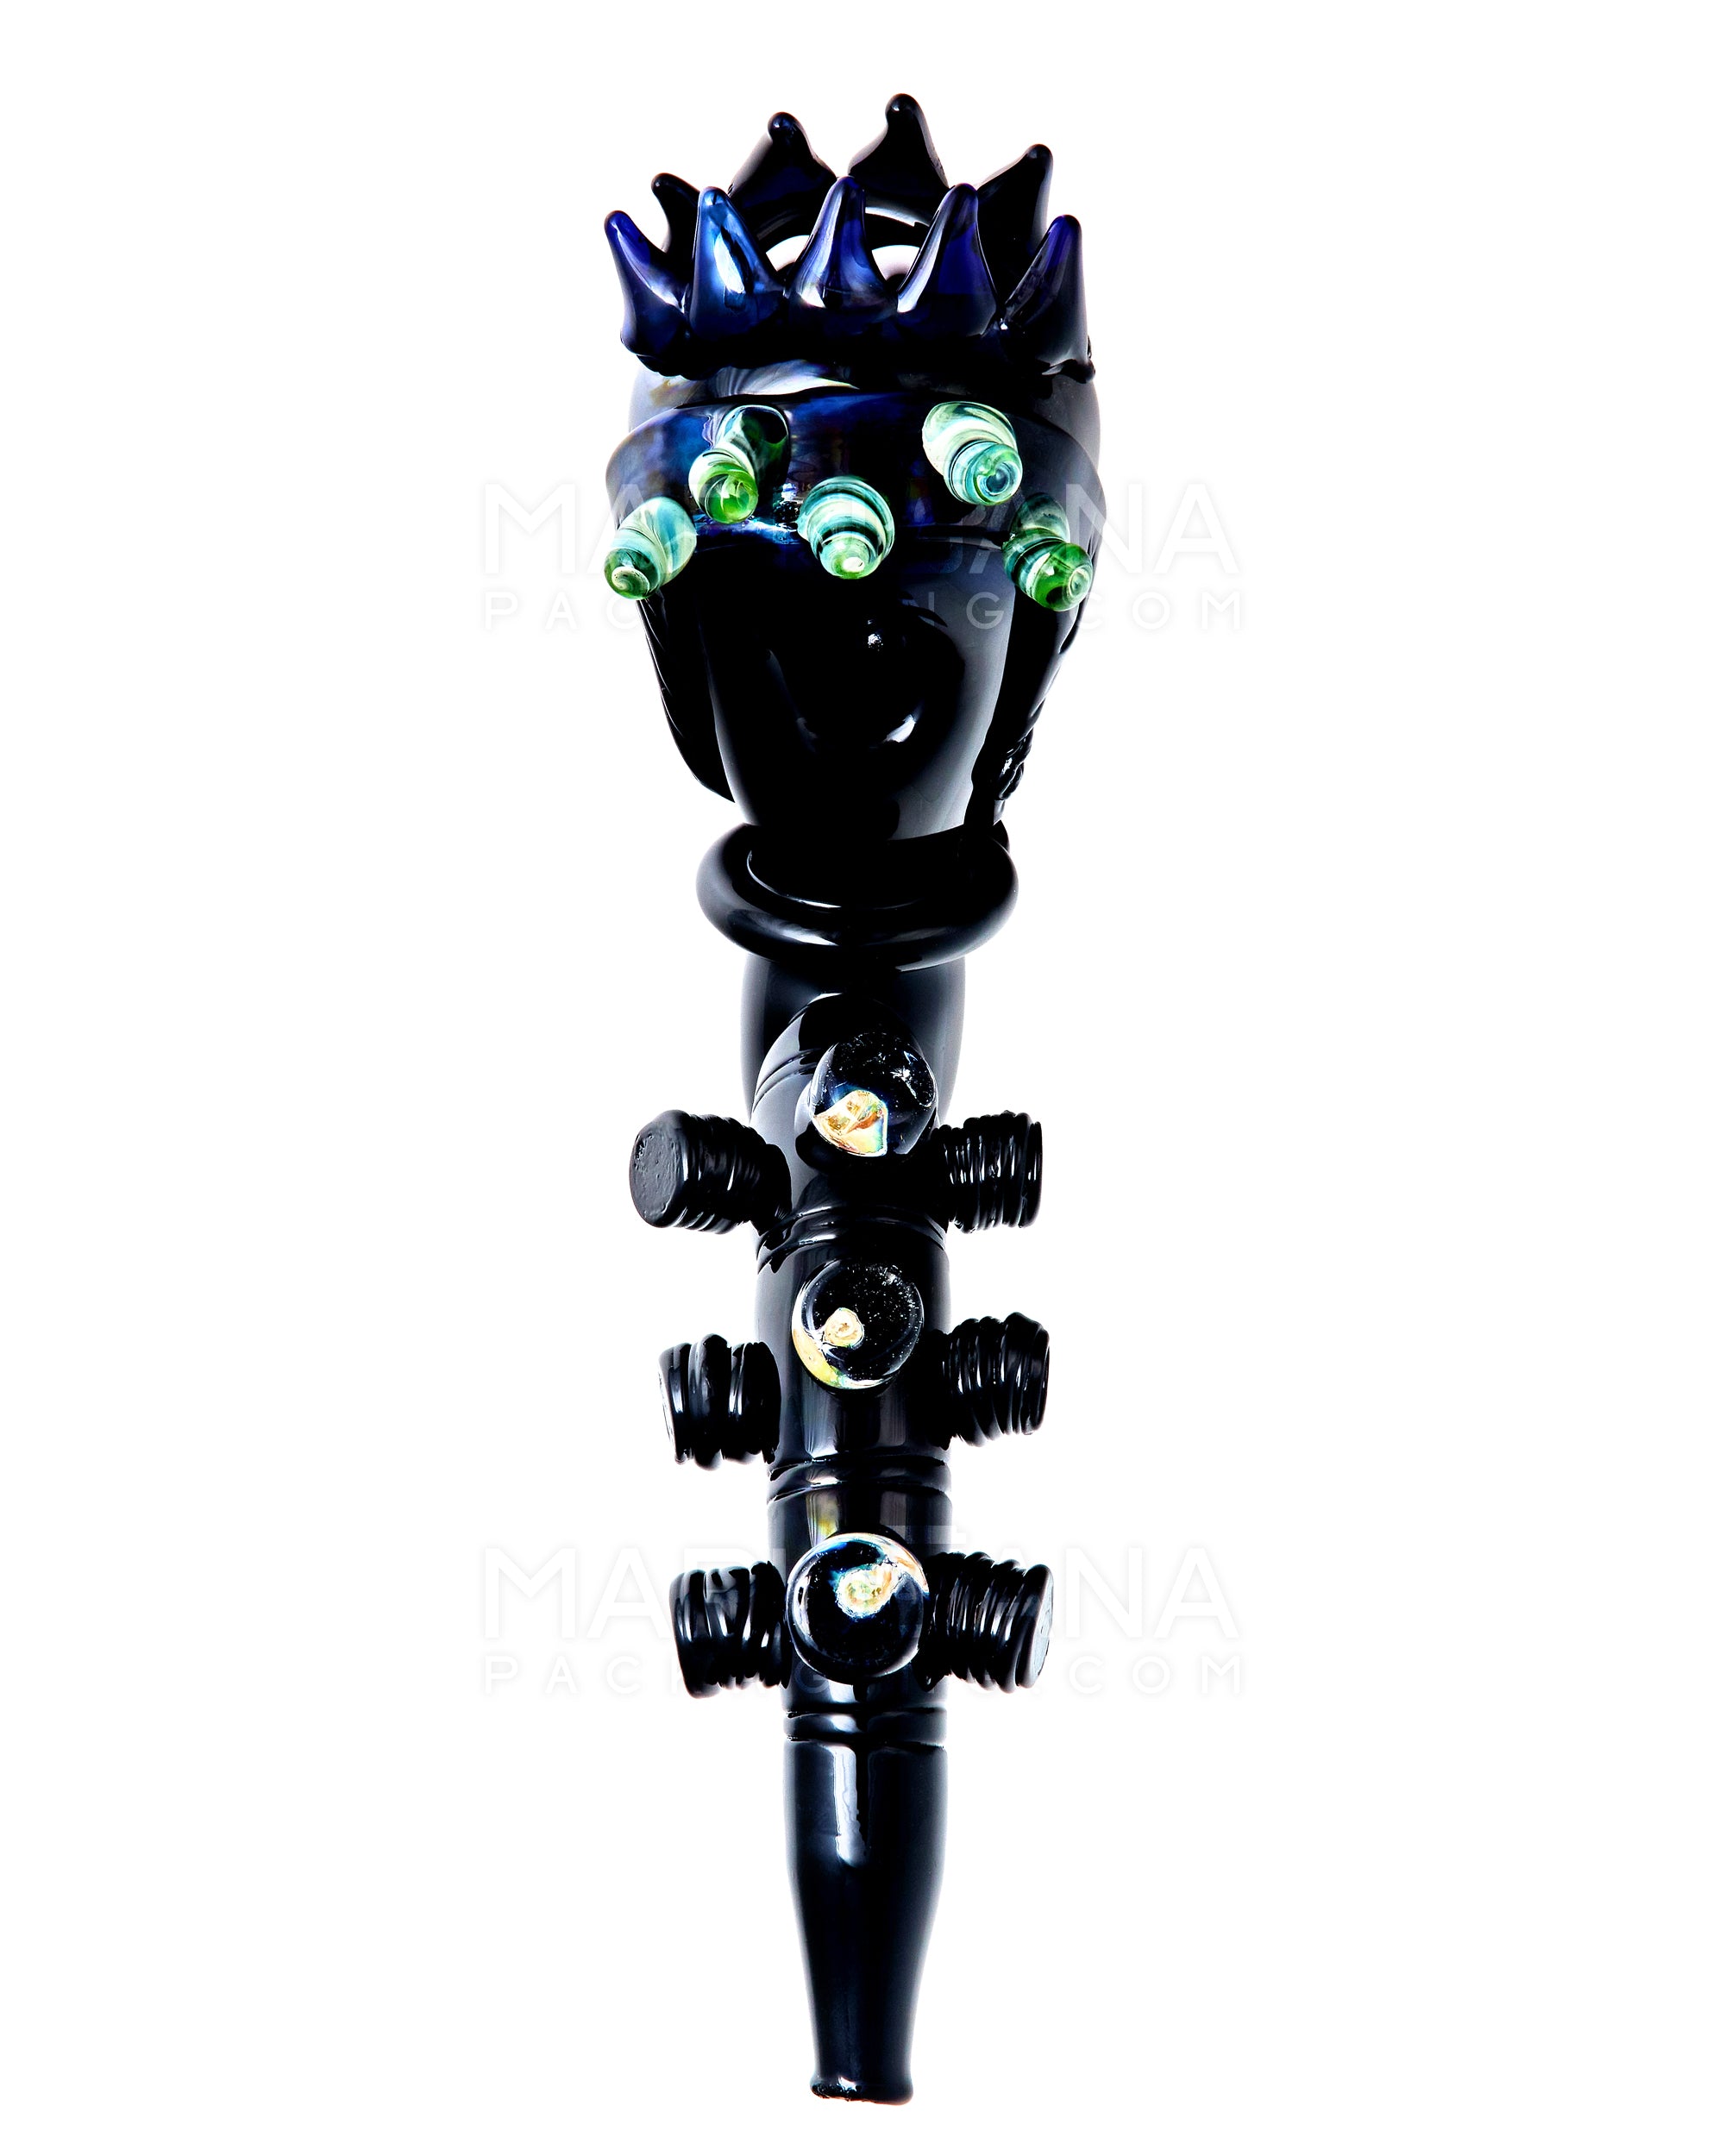 Heady | Black Lagoon Spiked Hand Pipe w/ Marble Knob Knockers | 9in Long - Glass - Black - 2